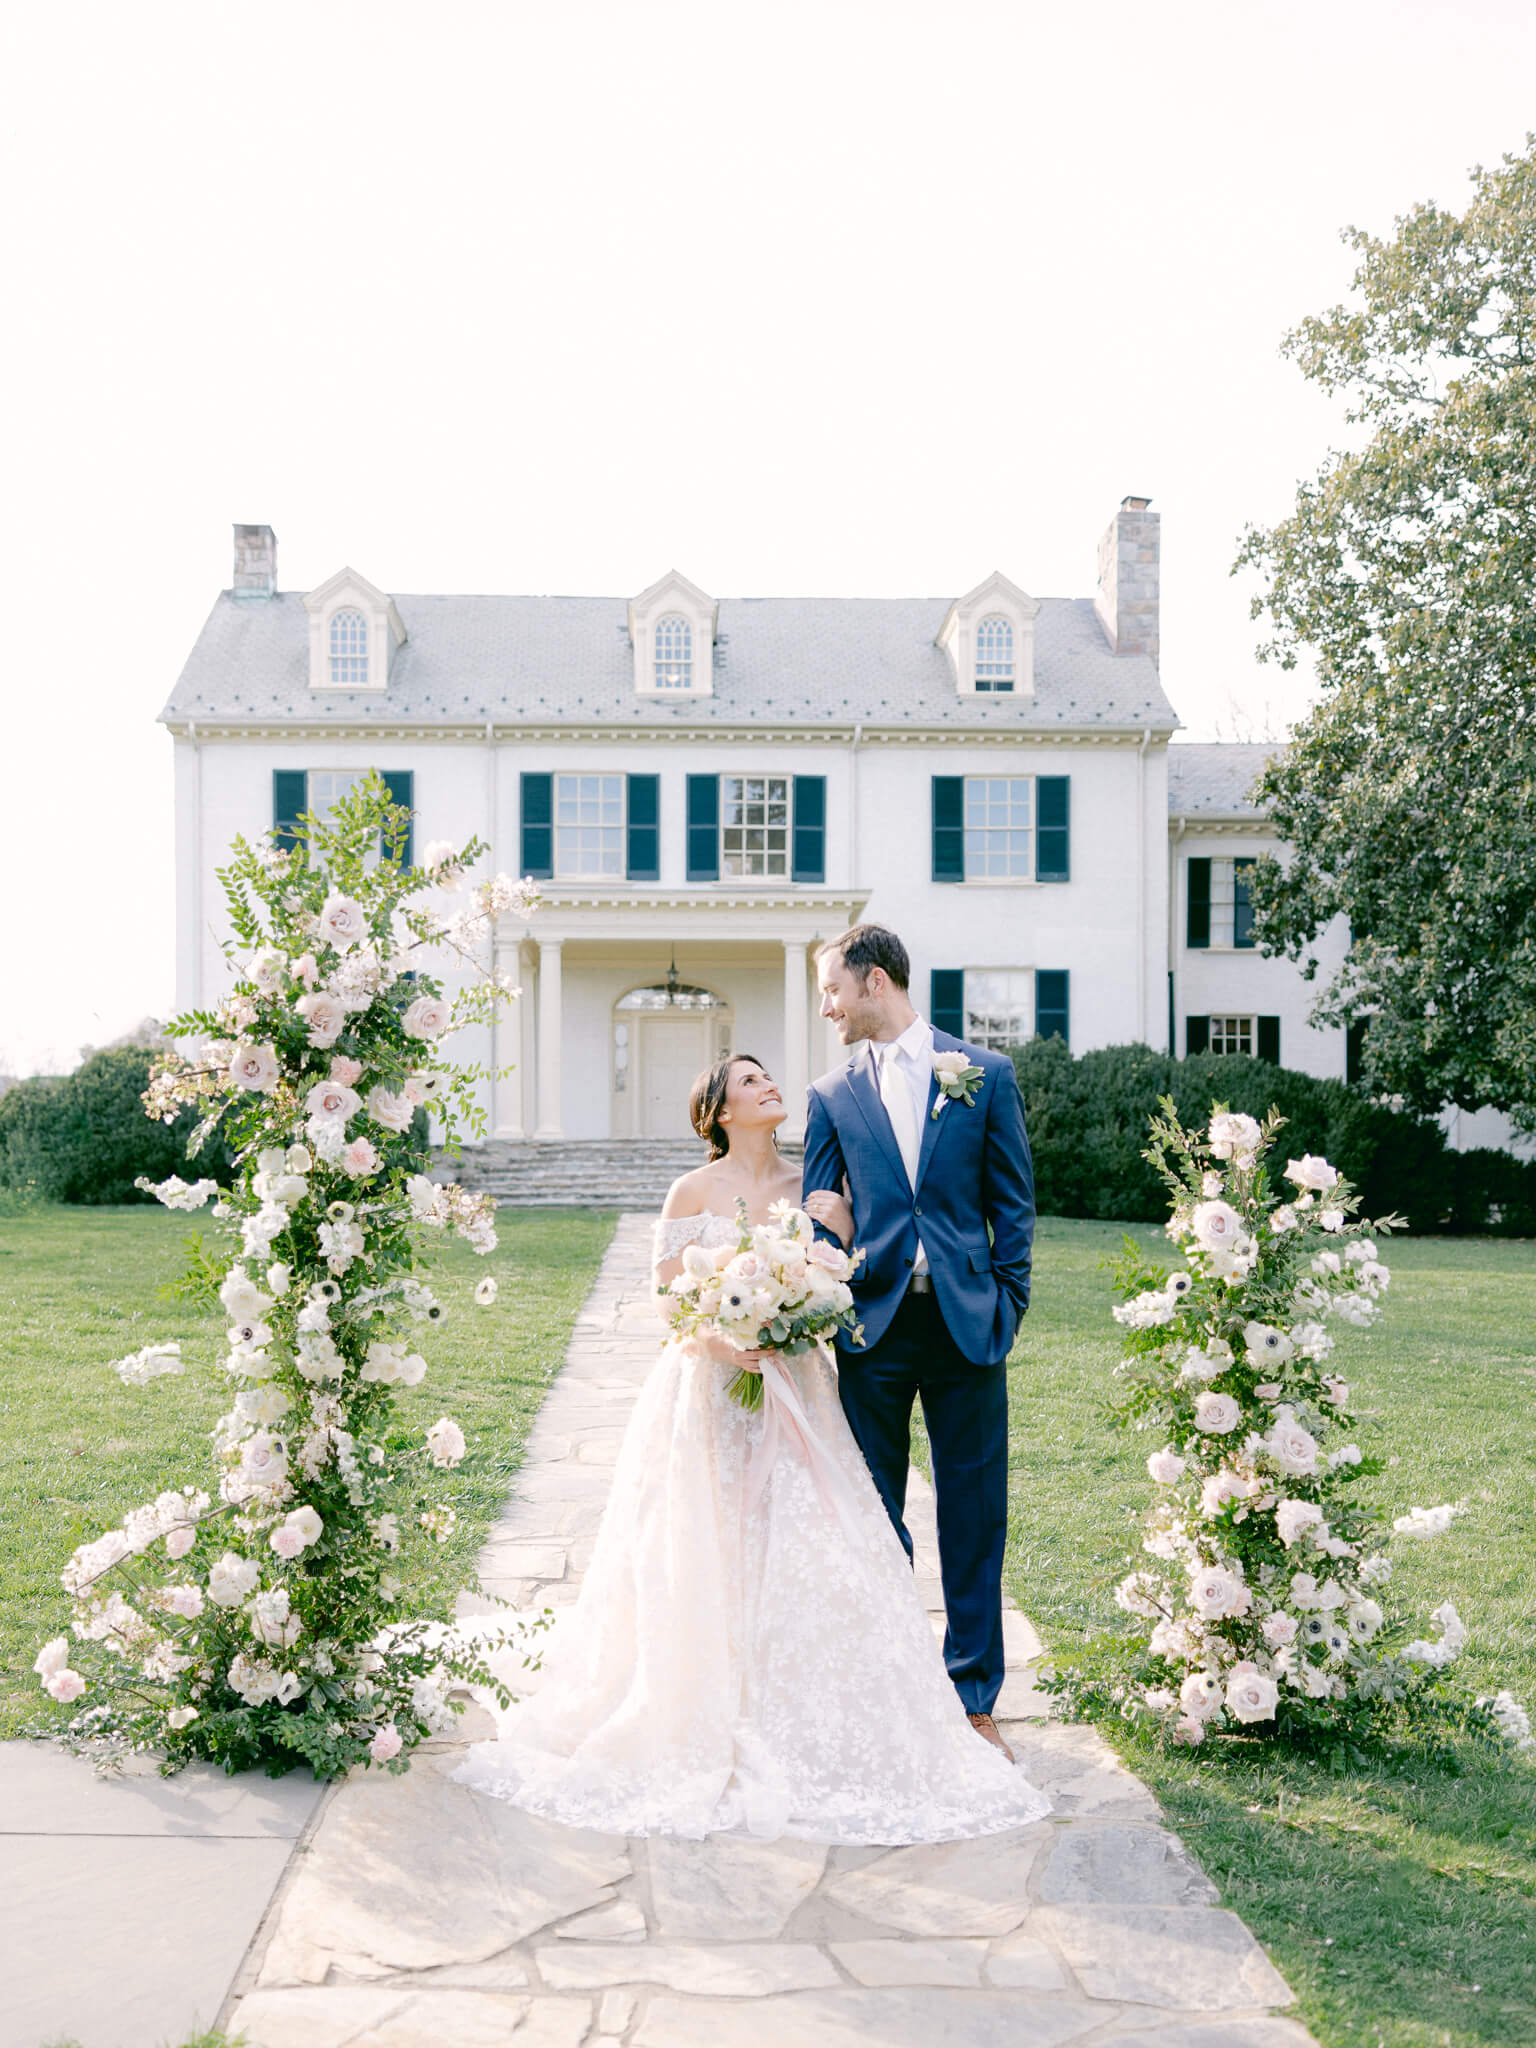 A newlywed couple in a suit and wedding dress standing between a flower arch in front of Rust Manor House.